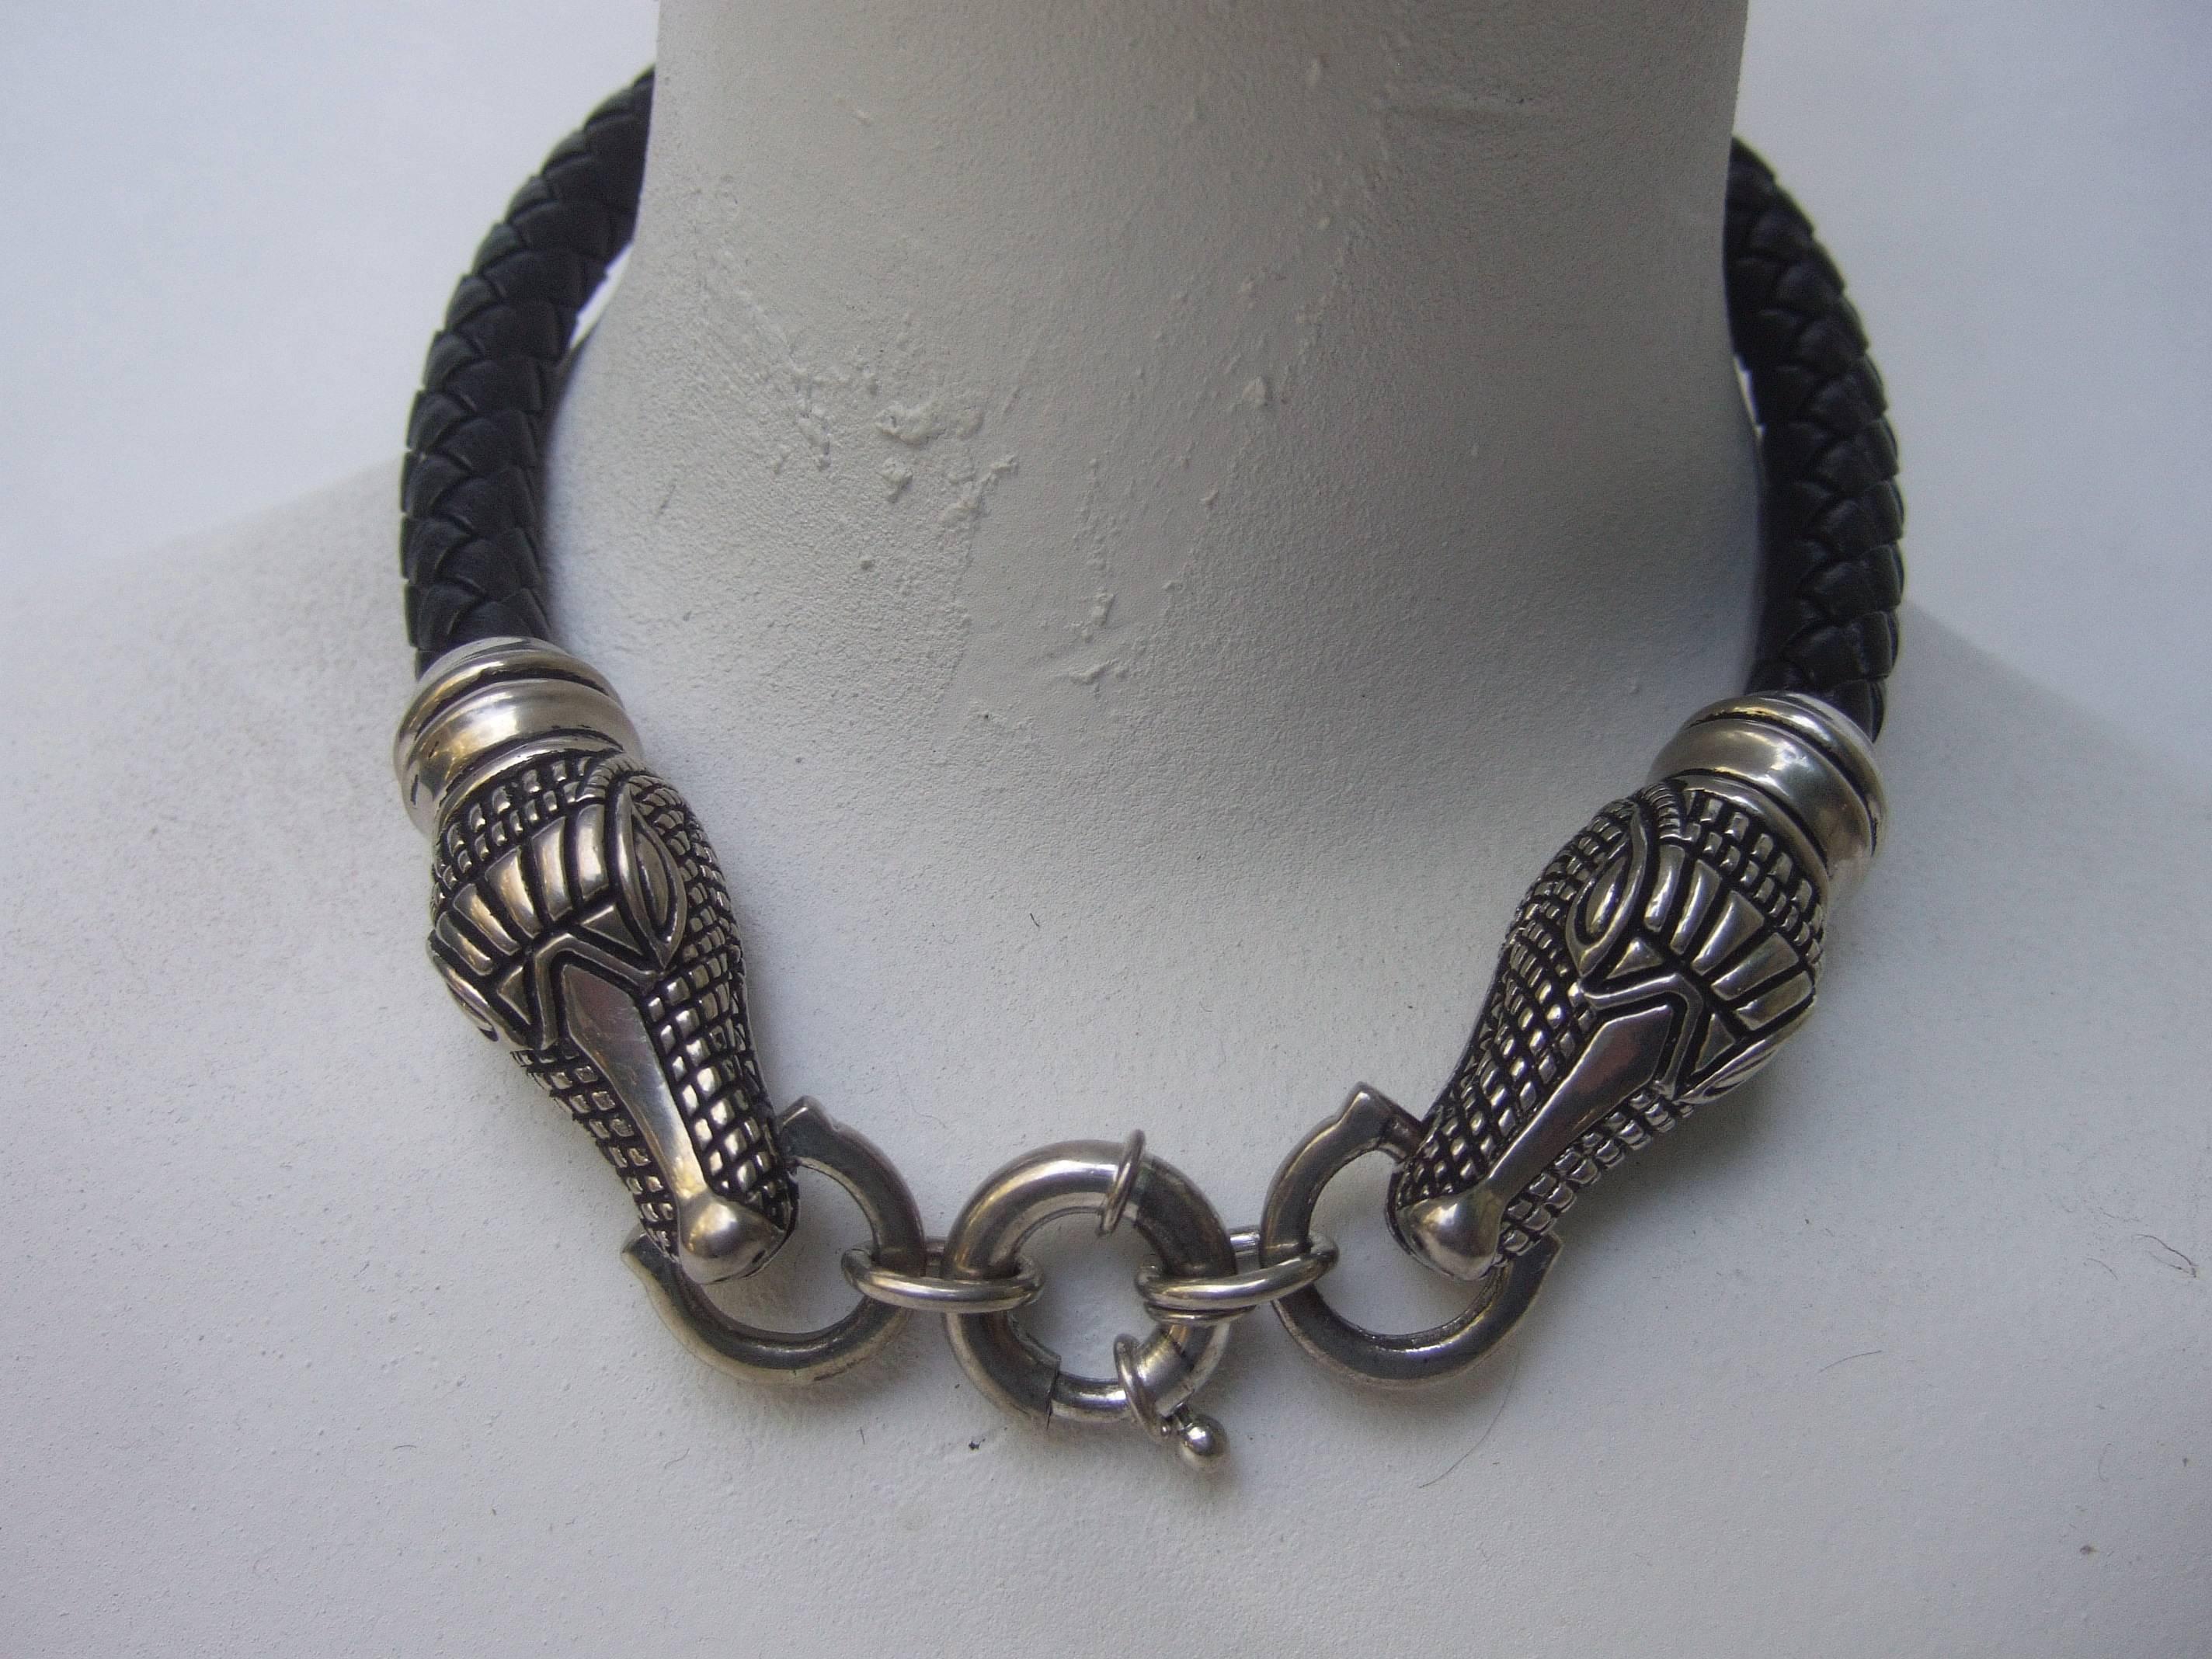 Sleek braided leather alligator head choker necklace
The unique choker necklace is designed with a pair
of silver metal alligators heads adhered to a black
leather braided cord. The metal alligator heads have
etched and impressed designs that